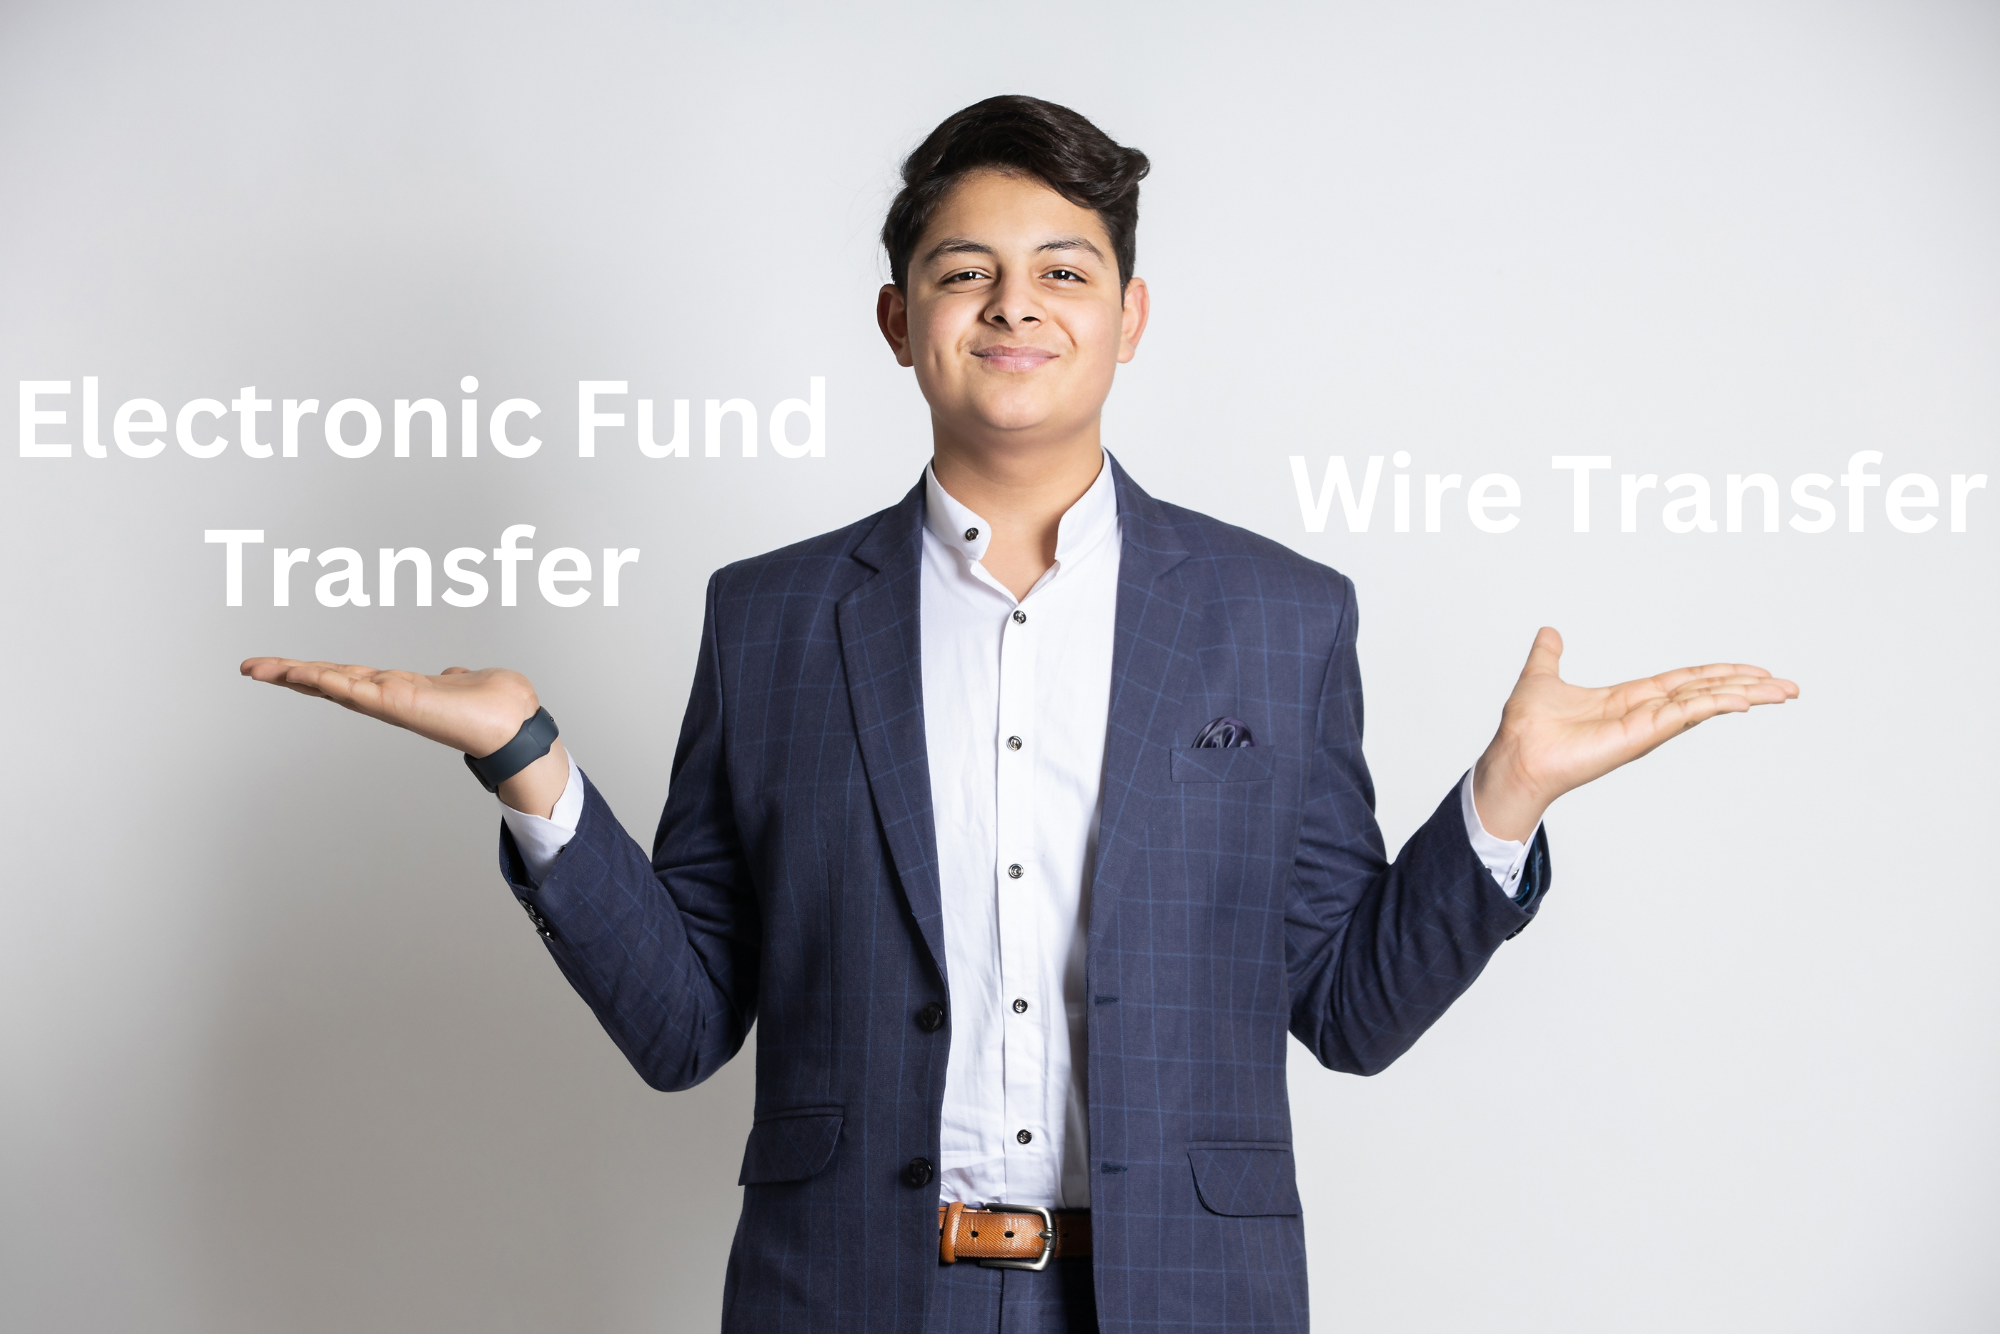 Electronic Funds Transfer vs. Wire Transfer